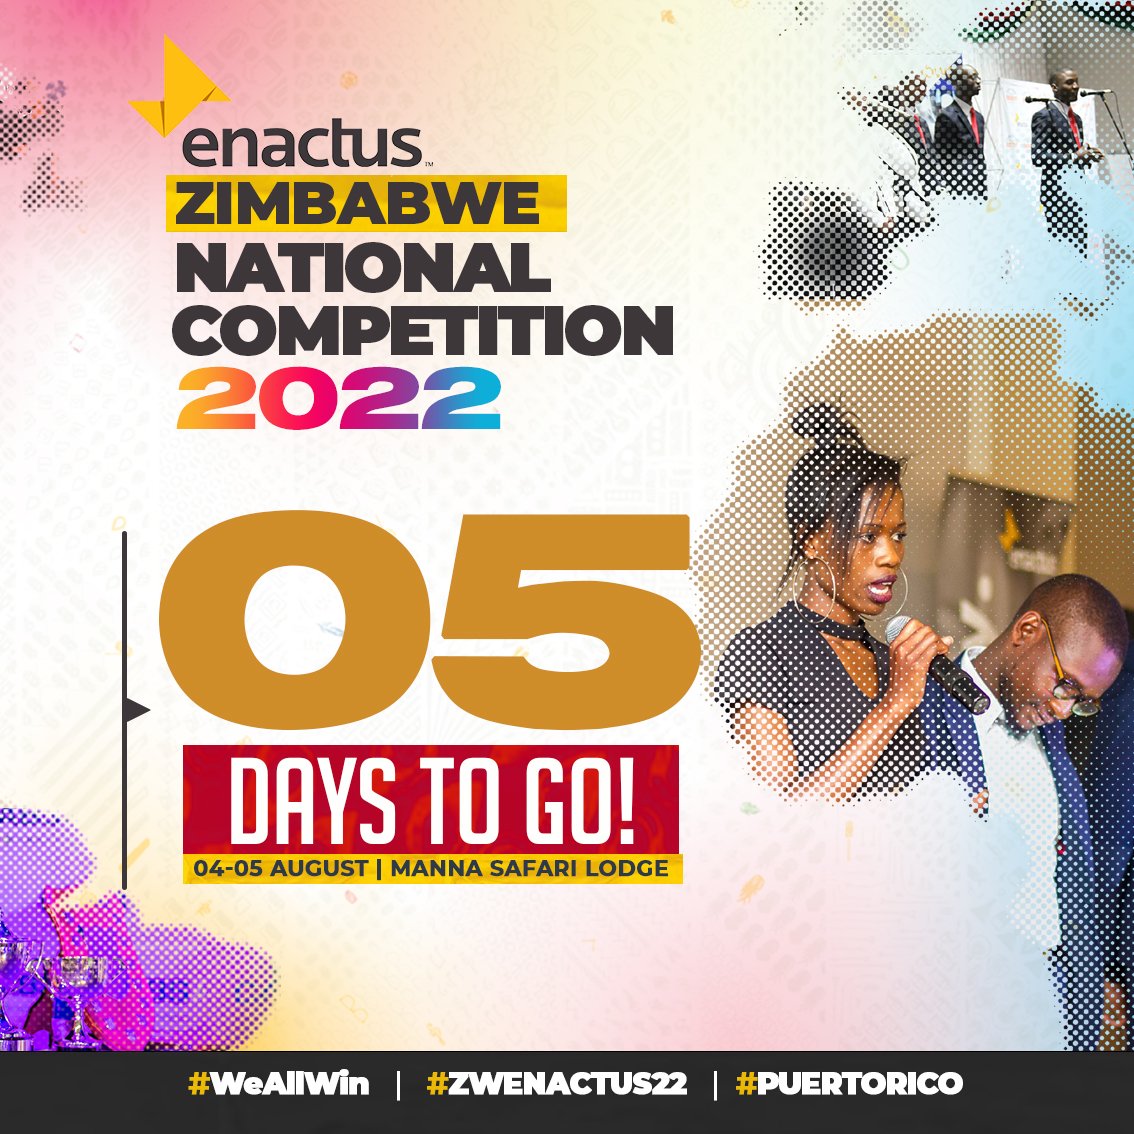 📢The countdown continues with only 5 days to go to the #EnactusZim Nationals competitions. All the best to the teams as they conduct their final preparations! #WeAllWin #Passiononpurpose @enactus @CleoMakoni